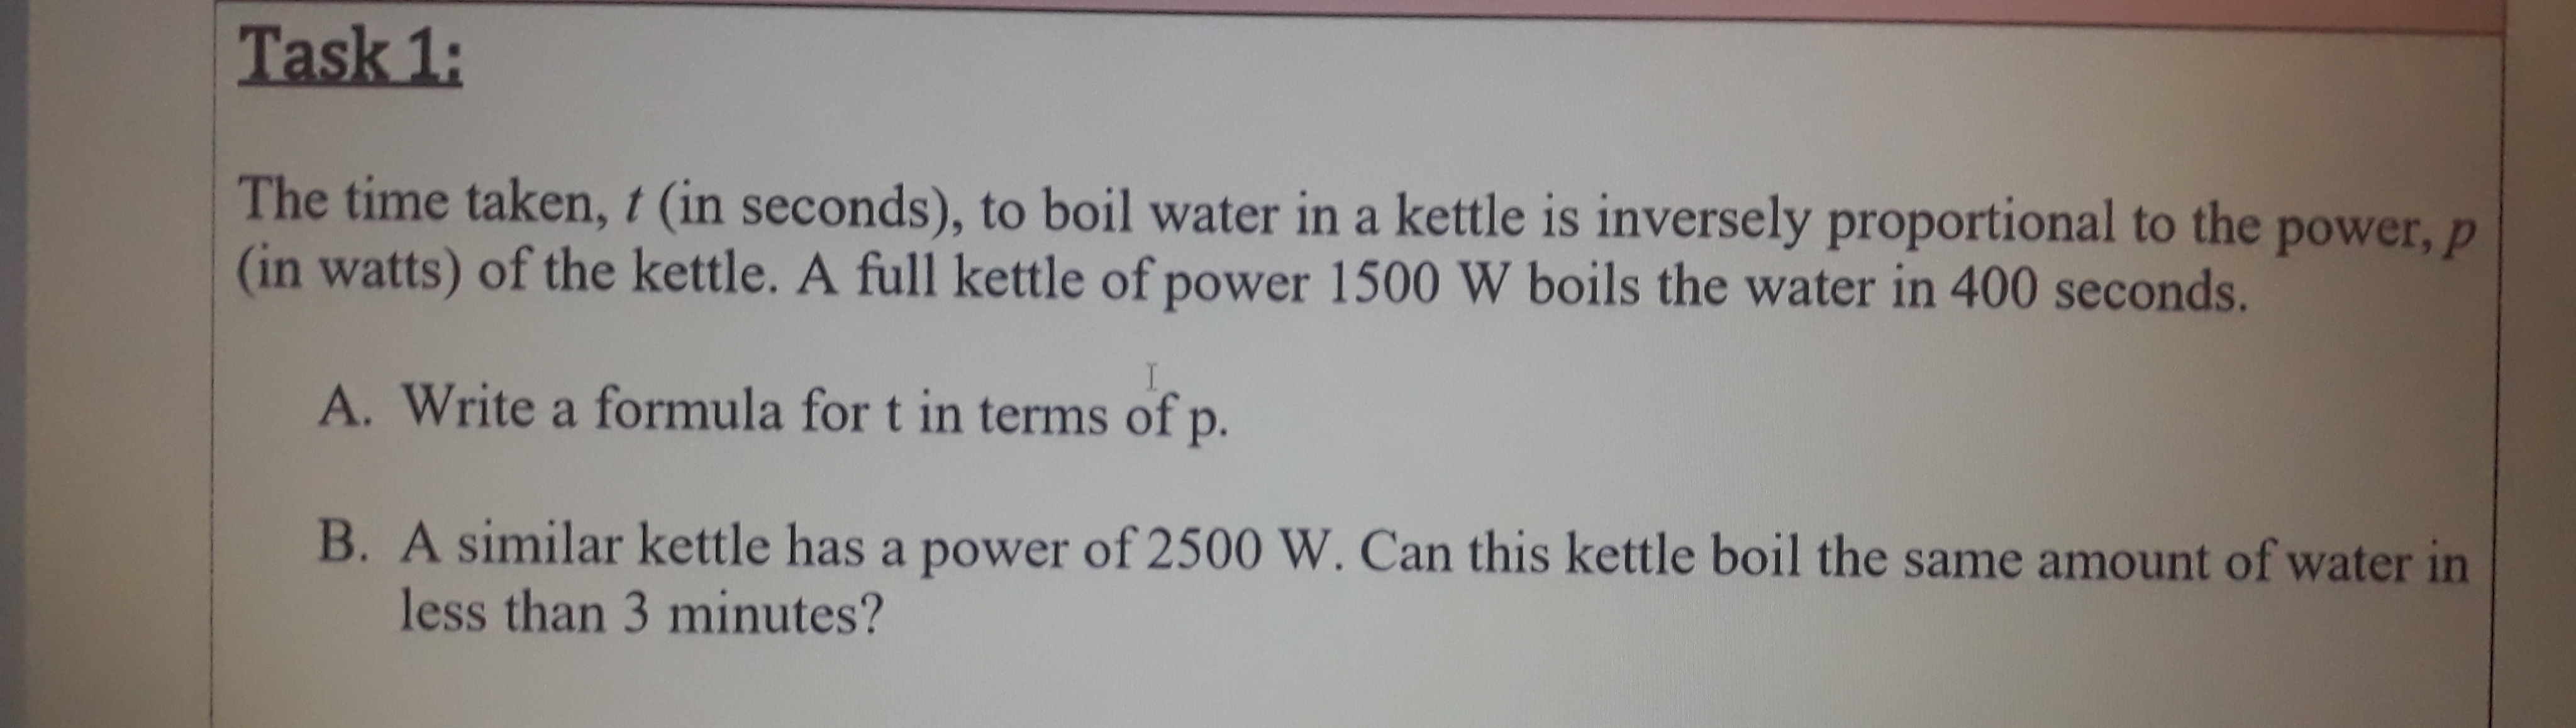 The time taken, t (in seconds), to boil water in a kettle is inversely proportional to the power, p
(in watts) of the kettle. A full kettle of power 1500 W boils the water in 400 seconds.
A. Write a formula for t in terms of p.
B. A similar kettle has a power of 2500 W. Can this kettle boil the same amount of water in
less than 3 minutes?
